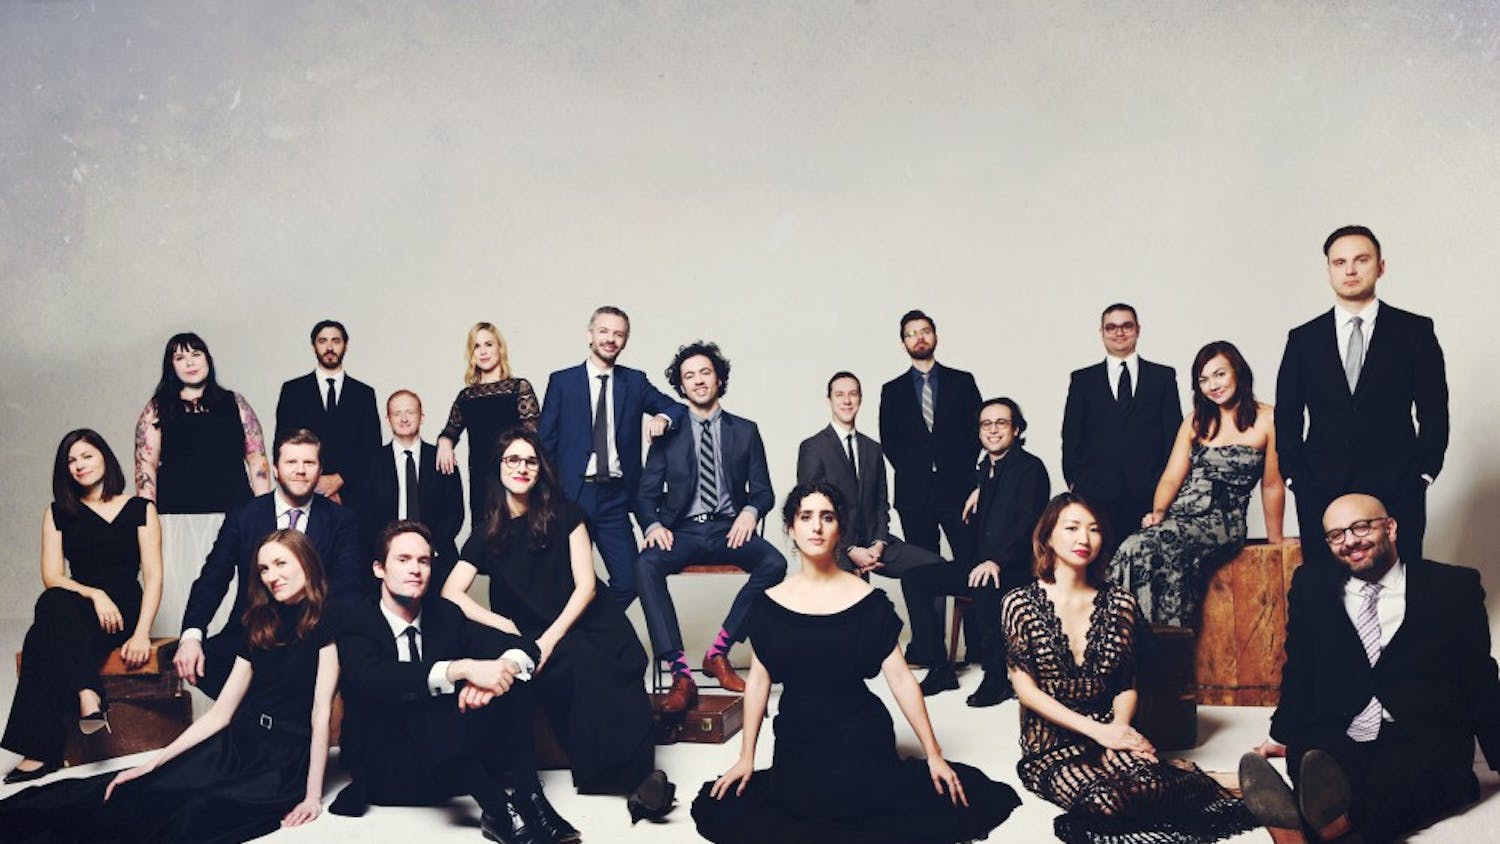 The Knights is a Brooklyn orchestra coming to the the IU Auditorium on Nov. 15. Clarinetist and composer Kinan Azmeh as well as mandolin expert Avi Avital will also perform at the concert Wednesday.